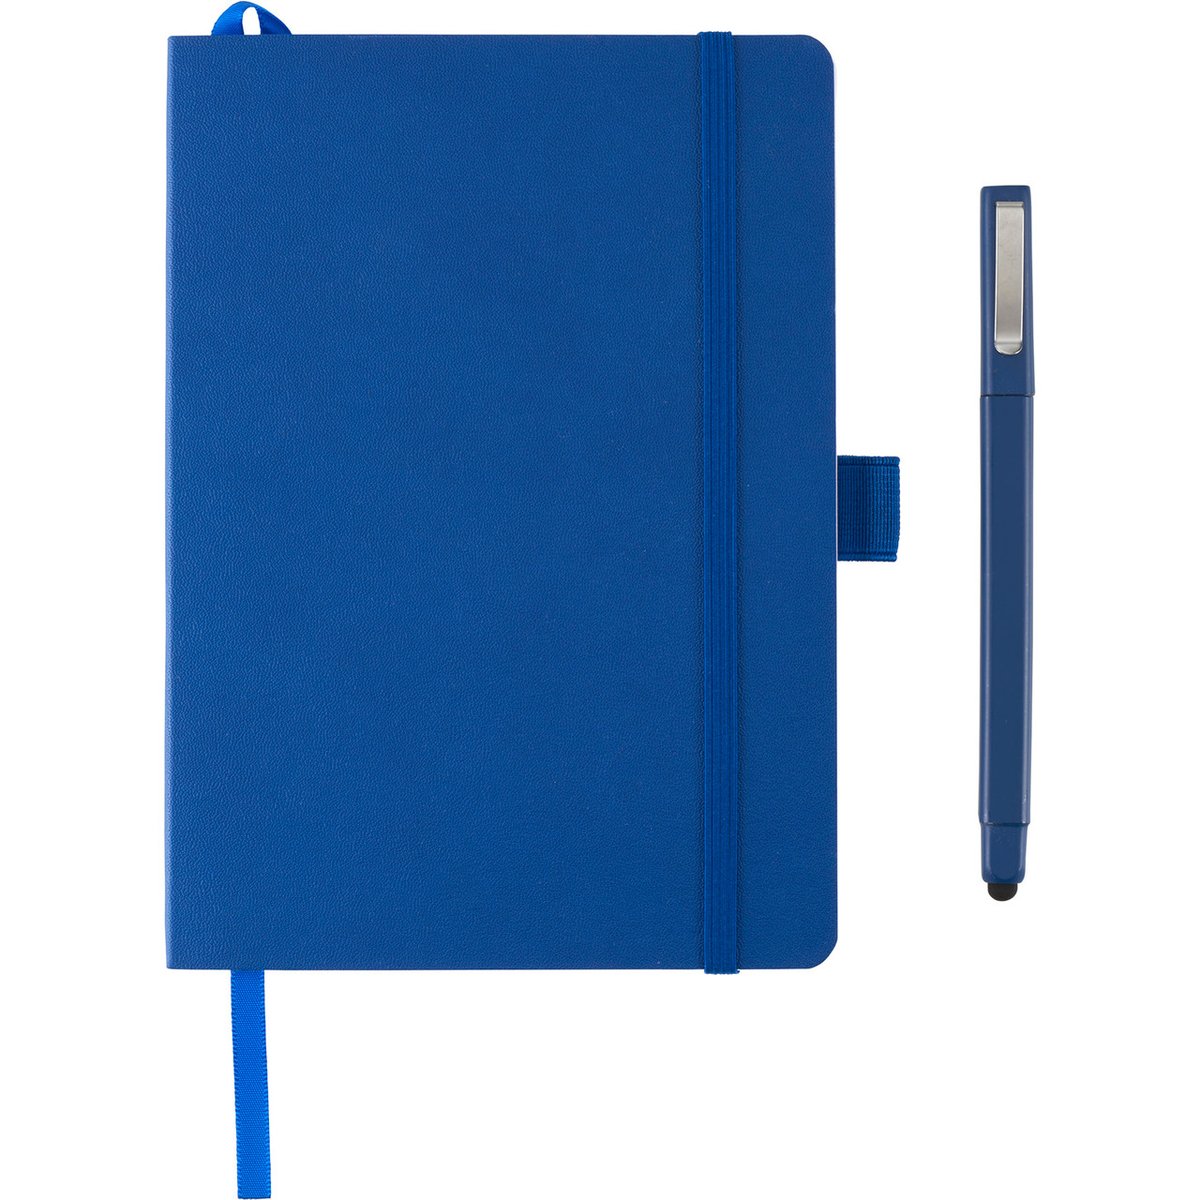 Our Firenze Soft Bound JournalBook Set is the perfect companion for a fresh academic year.

Shop all colours now at ow.ly/VQr350PFcOK

#schoolsupplies #backtoschool  #journal